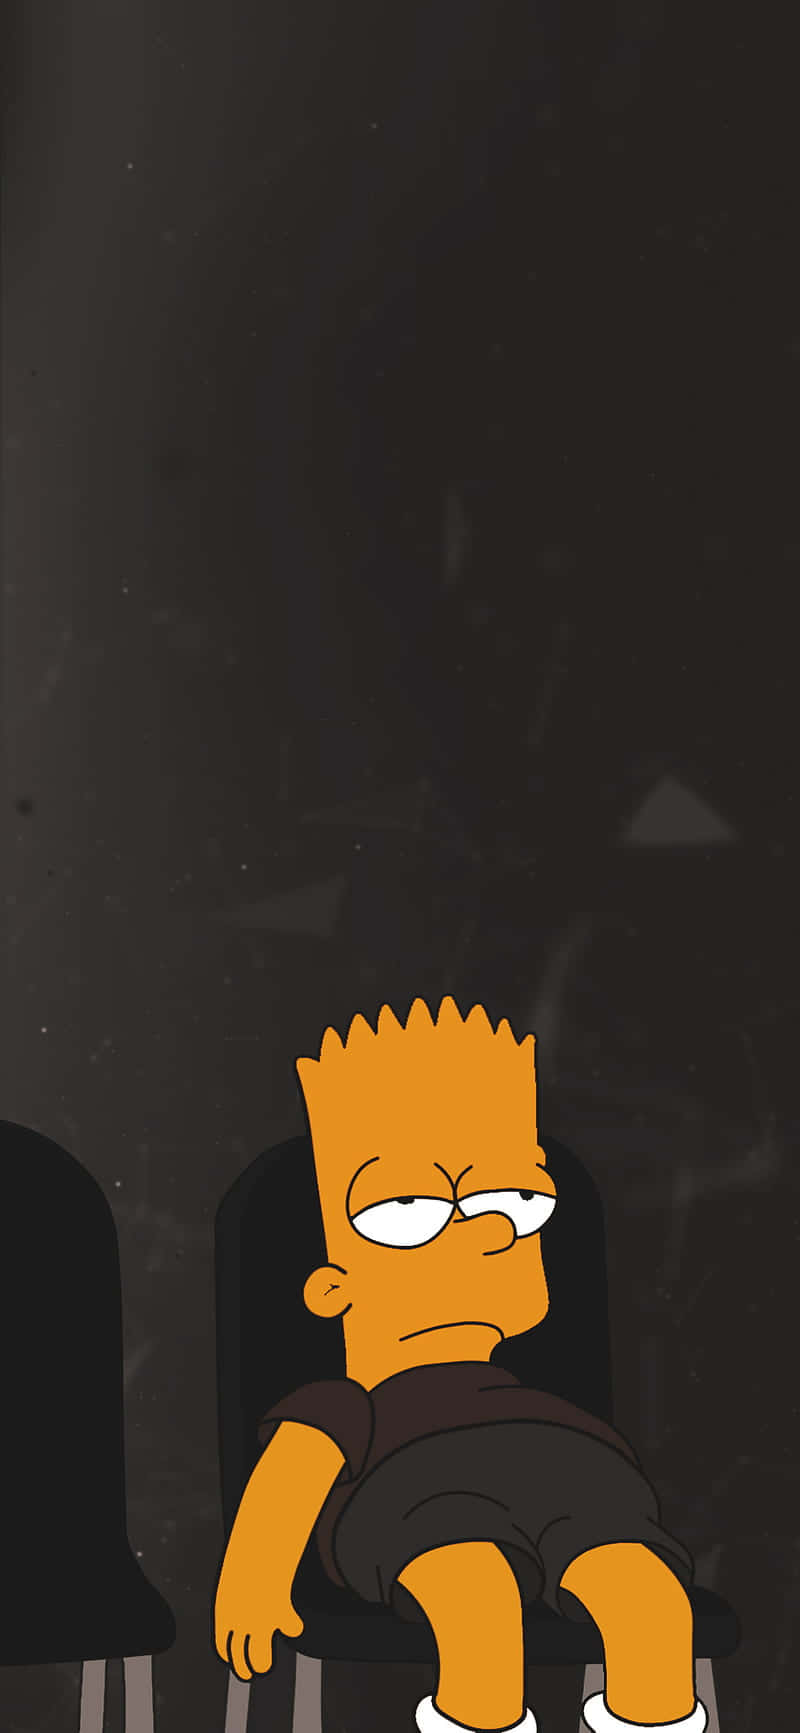 The Simpsons Character Is Sitting In A Chair Wallpaper